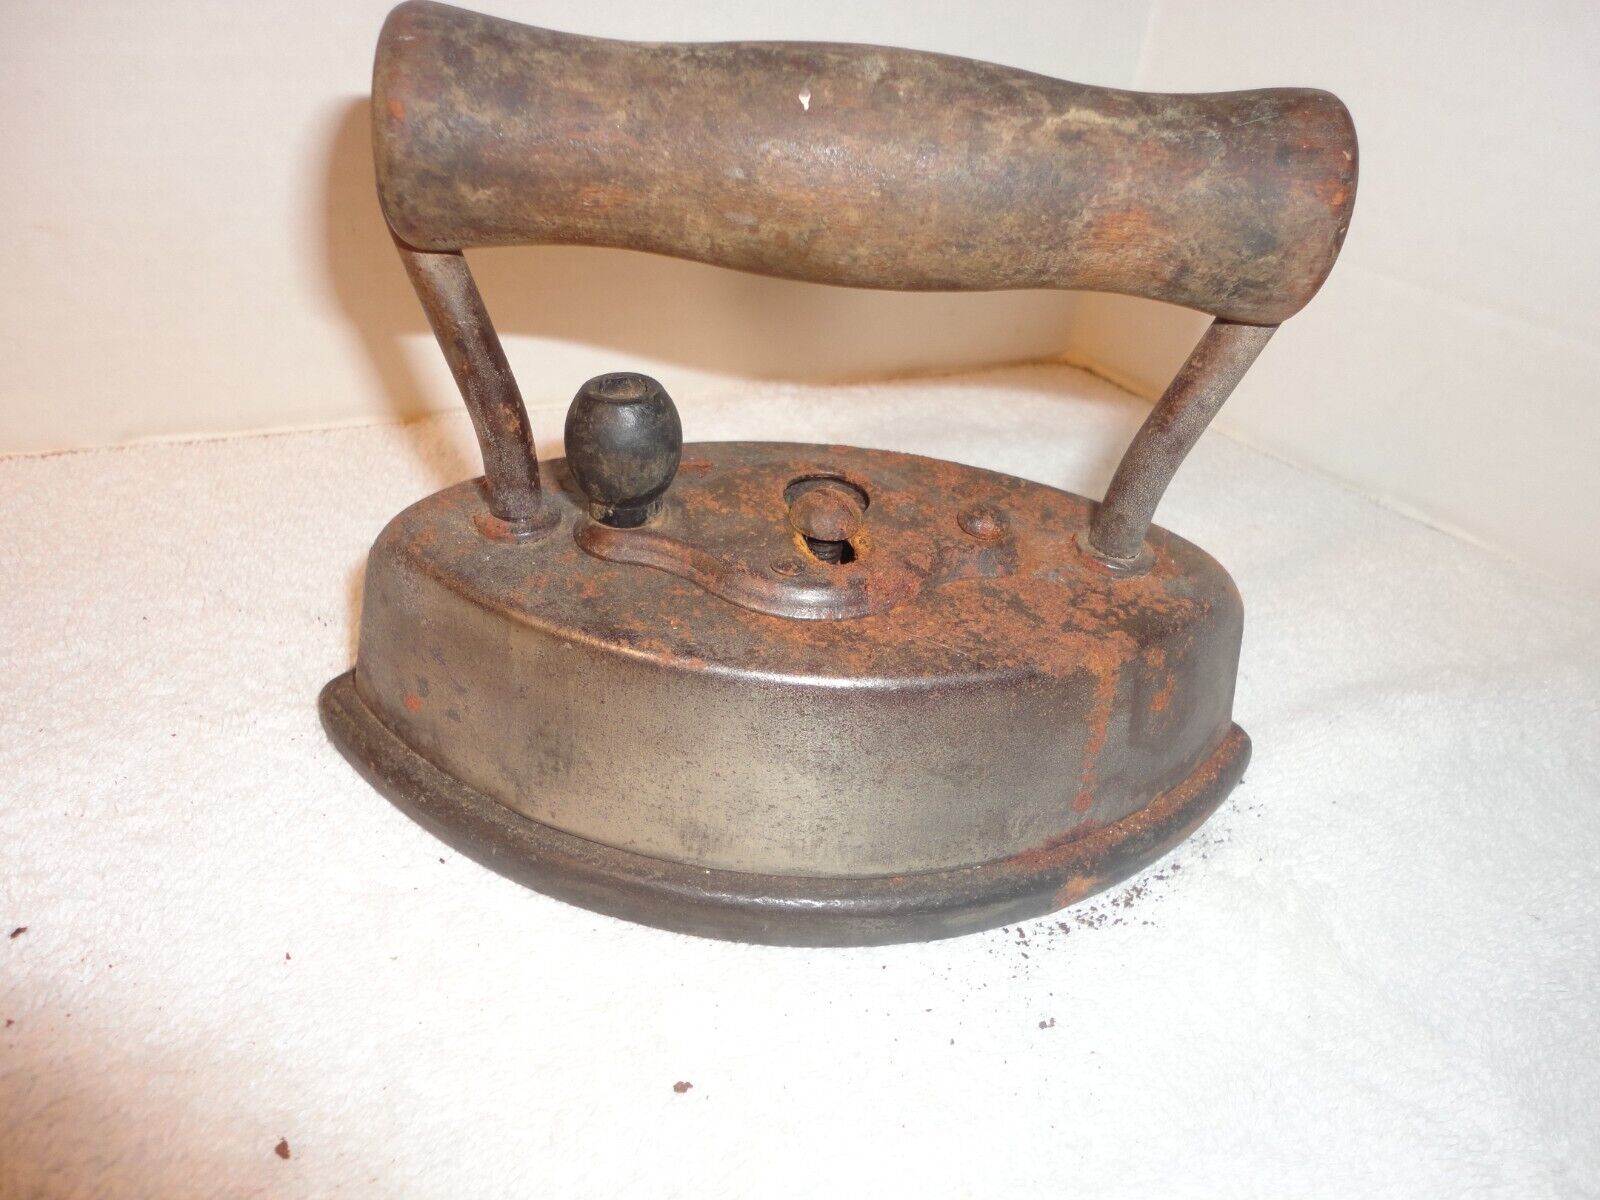 Antique Dover #2 Sad Iron with Removable Wood Handle Rustic Decor